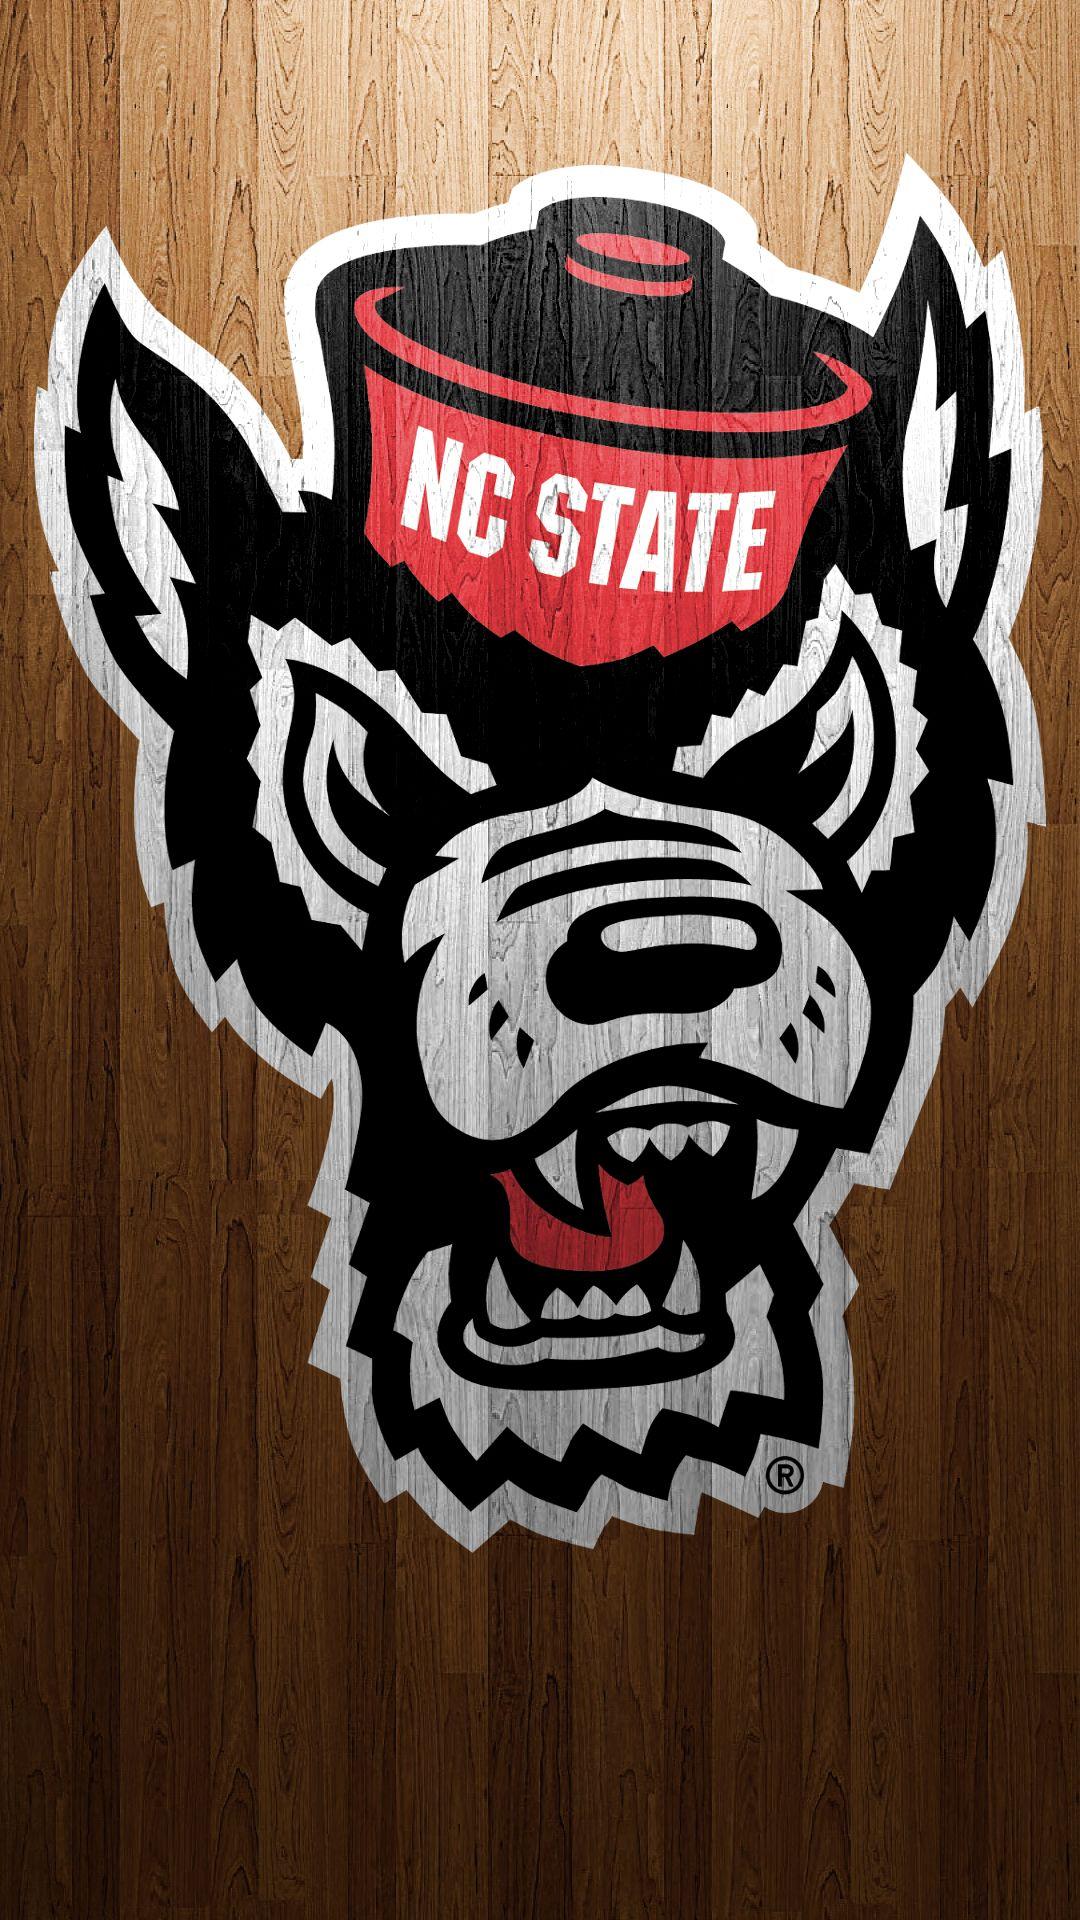 NC State IOS Wallpaper on Behance